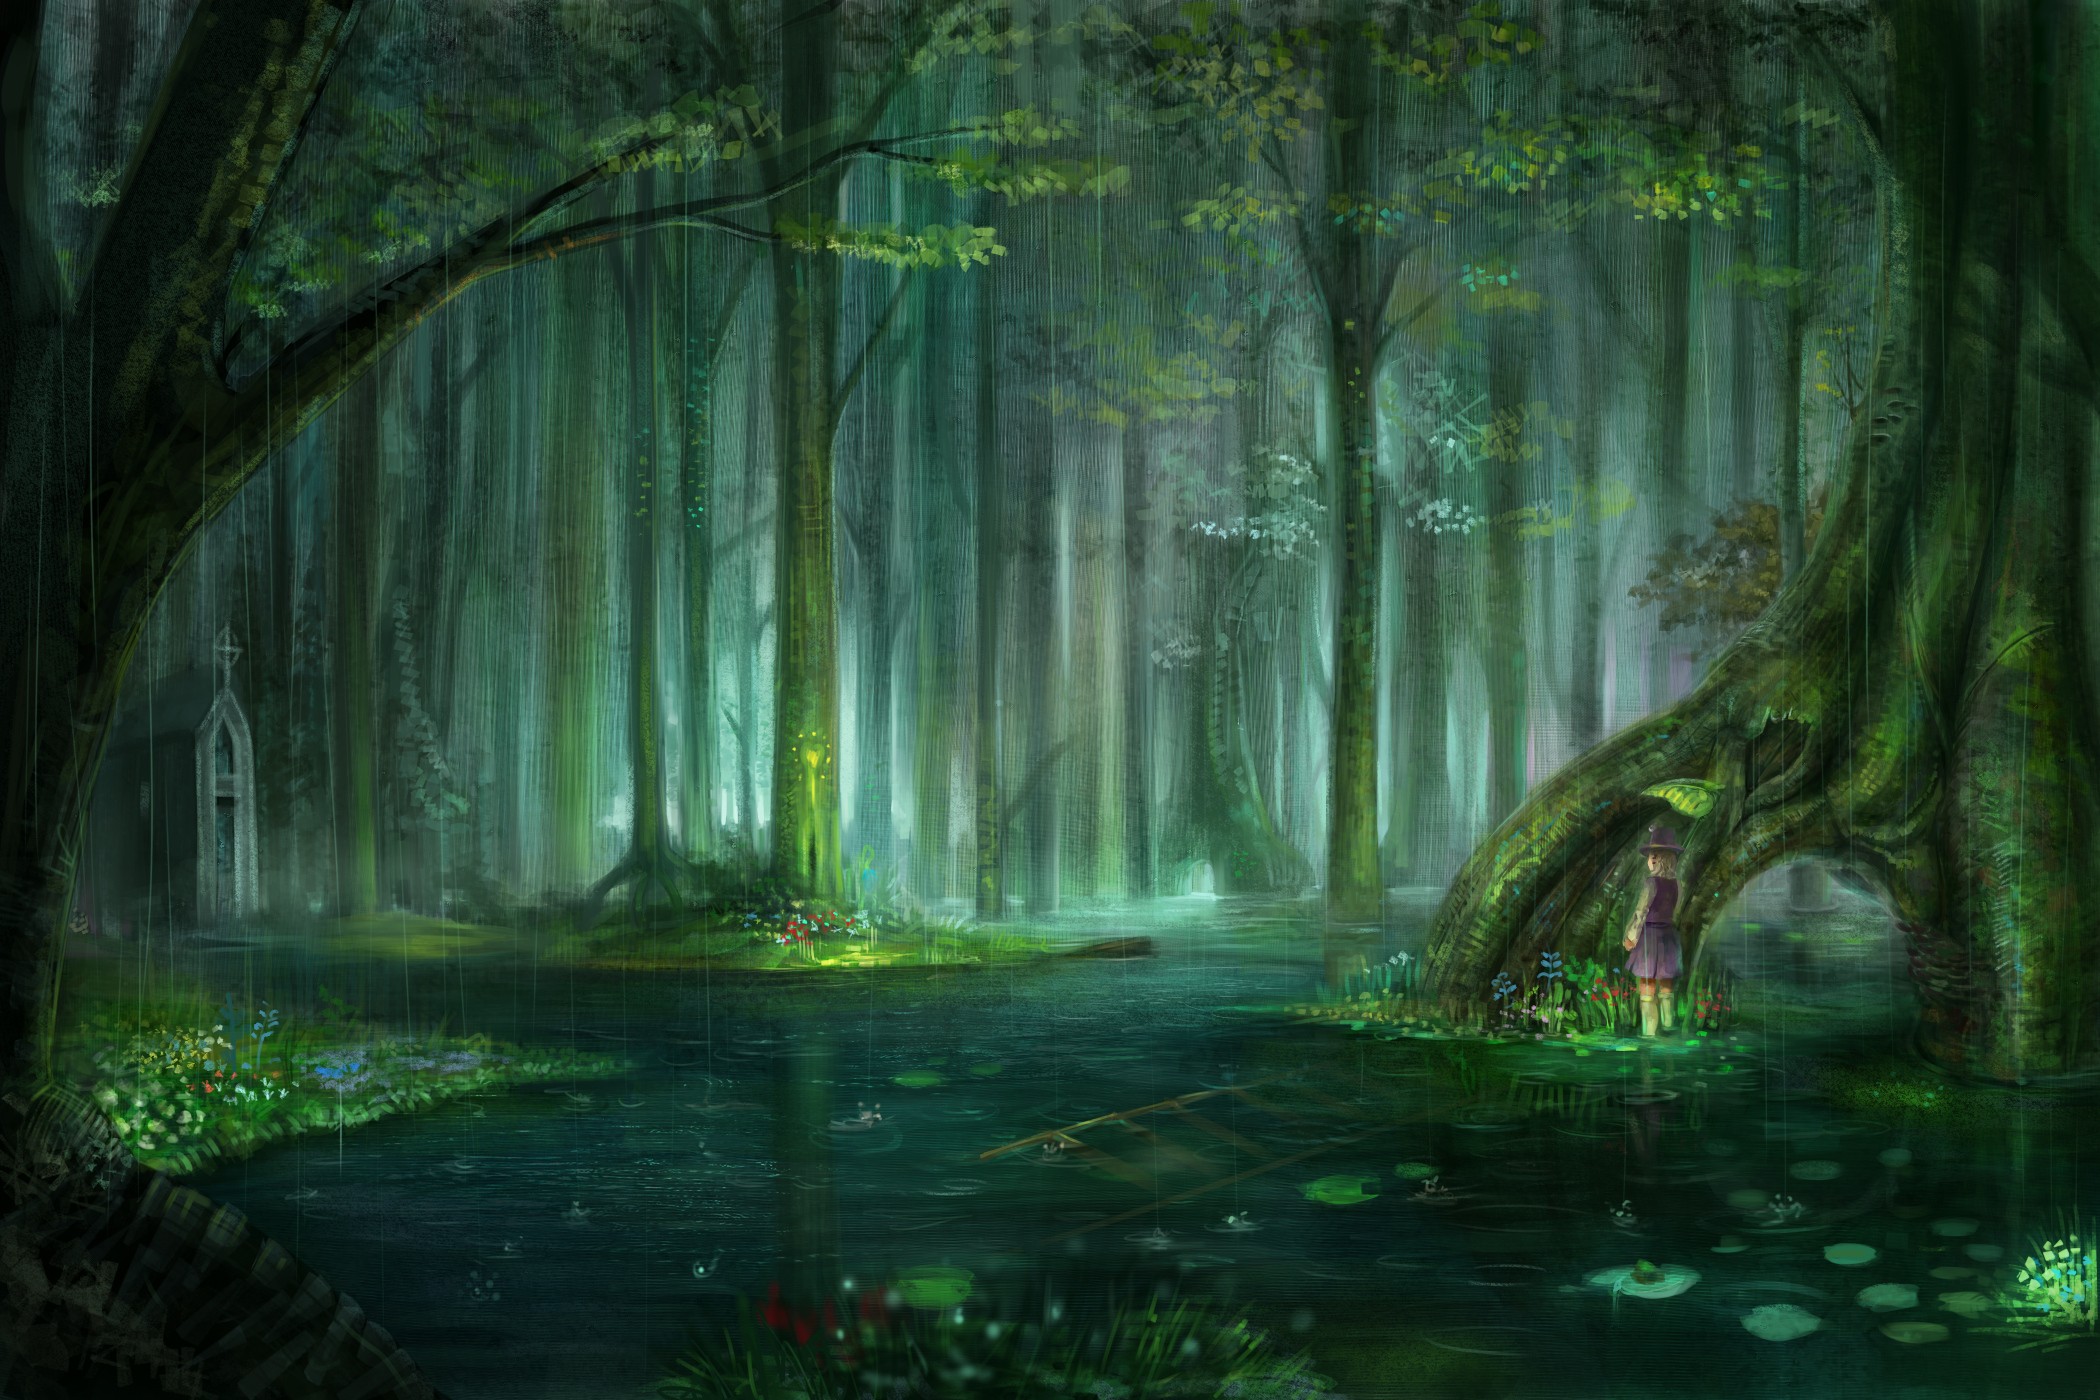 blondes, Water, Landscapes, Nature, Touhou, Trees, Rain, Flowers, Forest, Leaves, Pond, Plants, Short, Hair, Scenic, Moriya, Suwako, Chapel, Anime, Raindrops, Lakes, Water, Lilies, Temple, Ladder, Hats, Anime, Gi Wallpaper